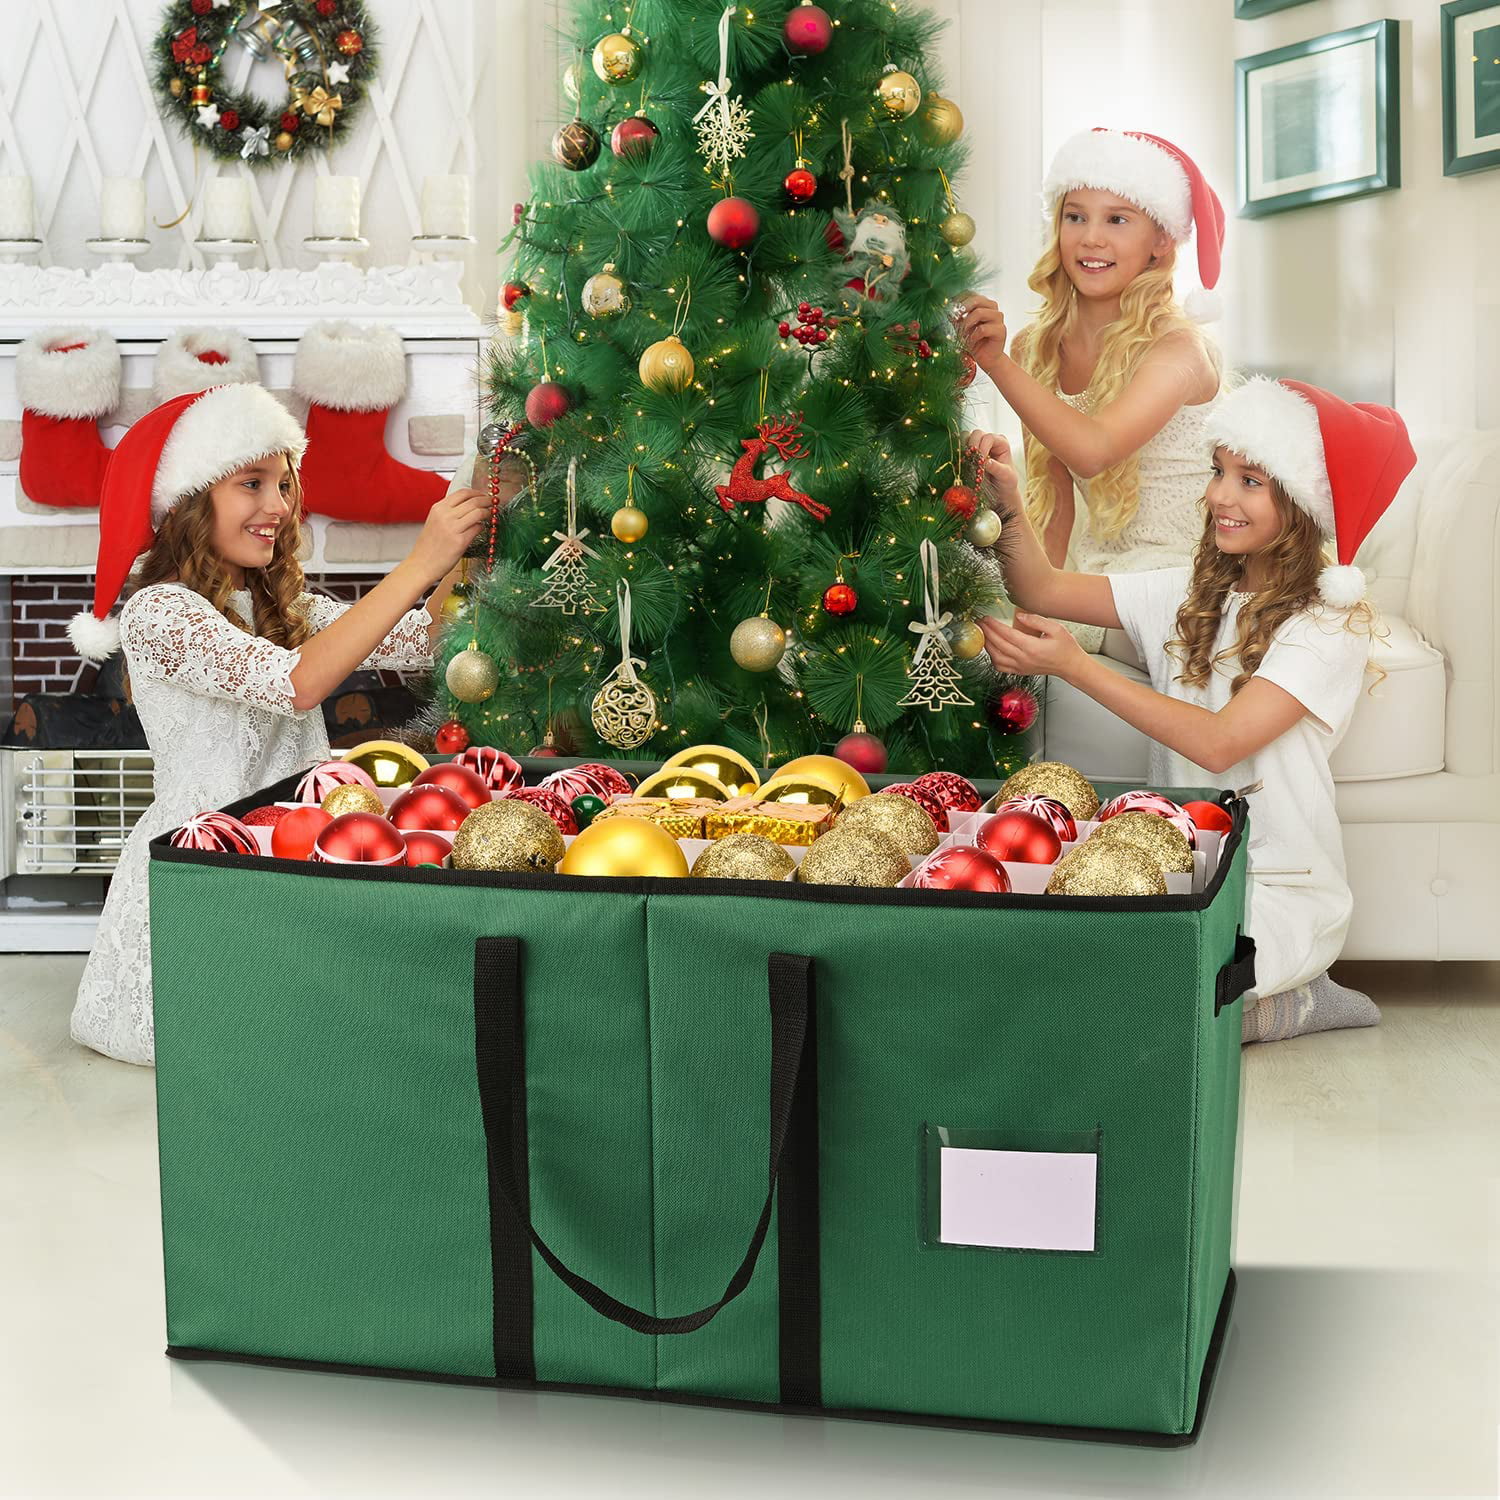  CHENGWEI Christmas Ornament Storage Box with Dividers